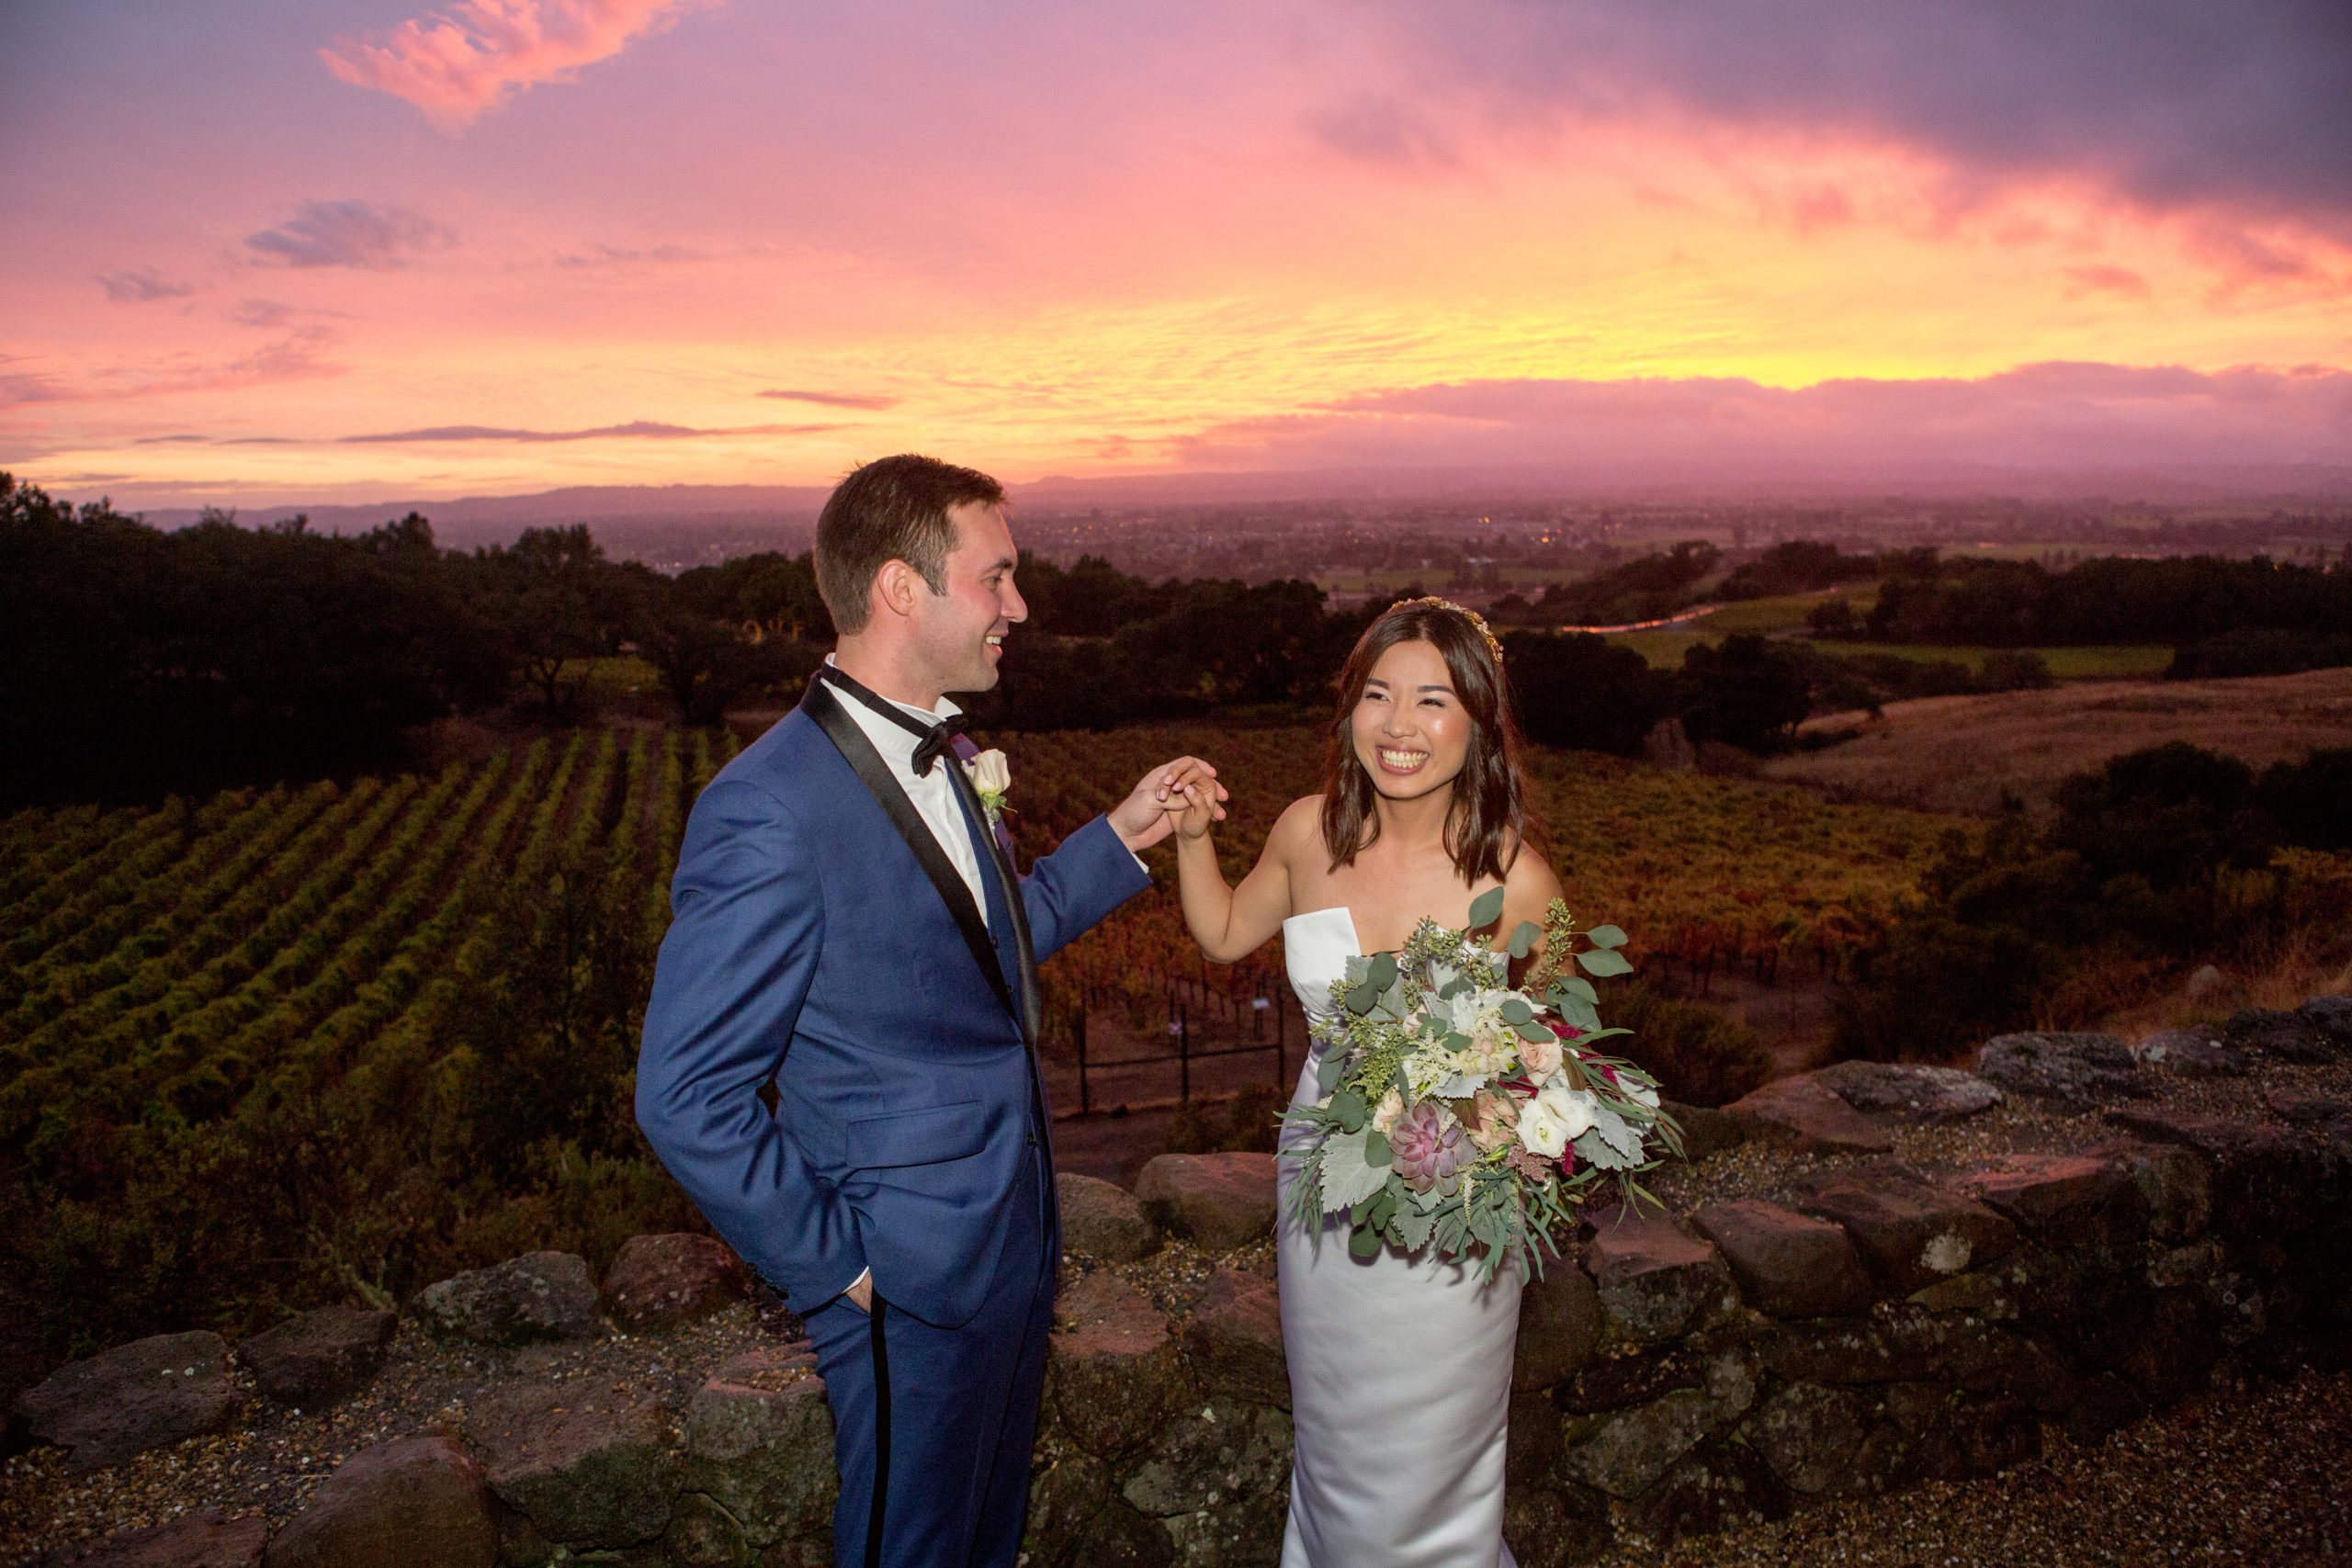 Napa Wedding Venues - Newlyweds in front of vineyards, hills and sunset at Paradise Ridge winery